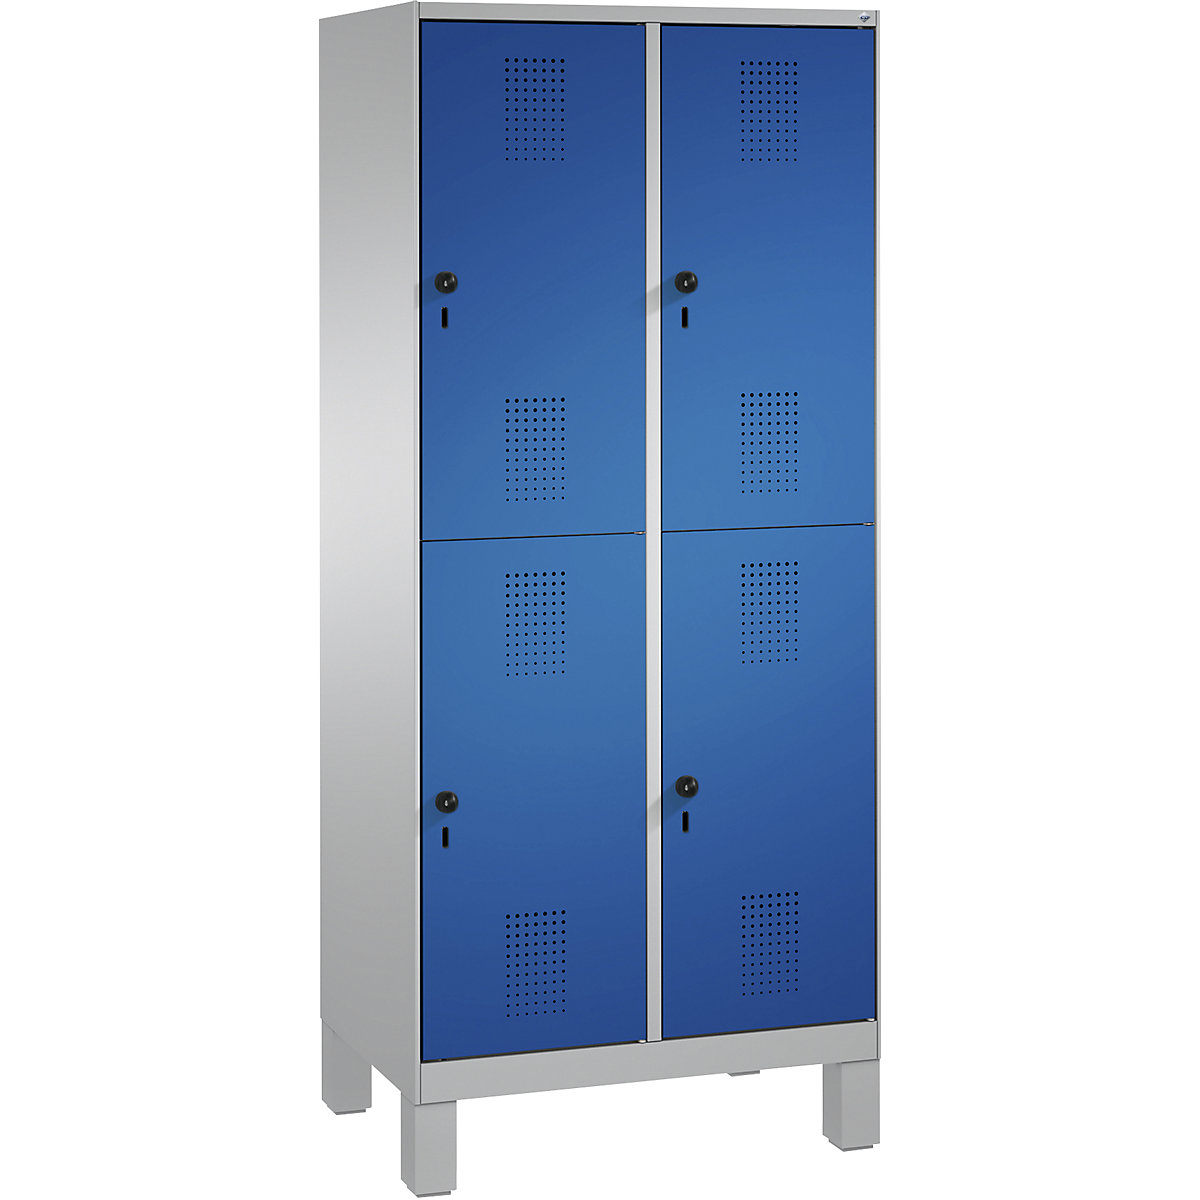 EVOLO cloakroom locker, double tier, with feet – C+P, 2 compartments, 2 shelf compartments each, compartment width 400 mm, white aluminium / gentian blue-12